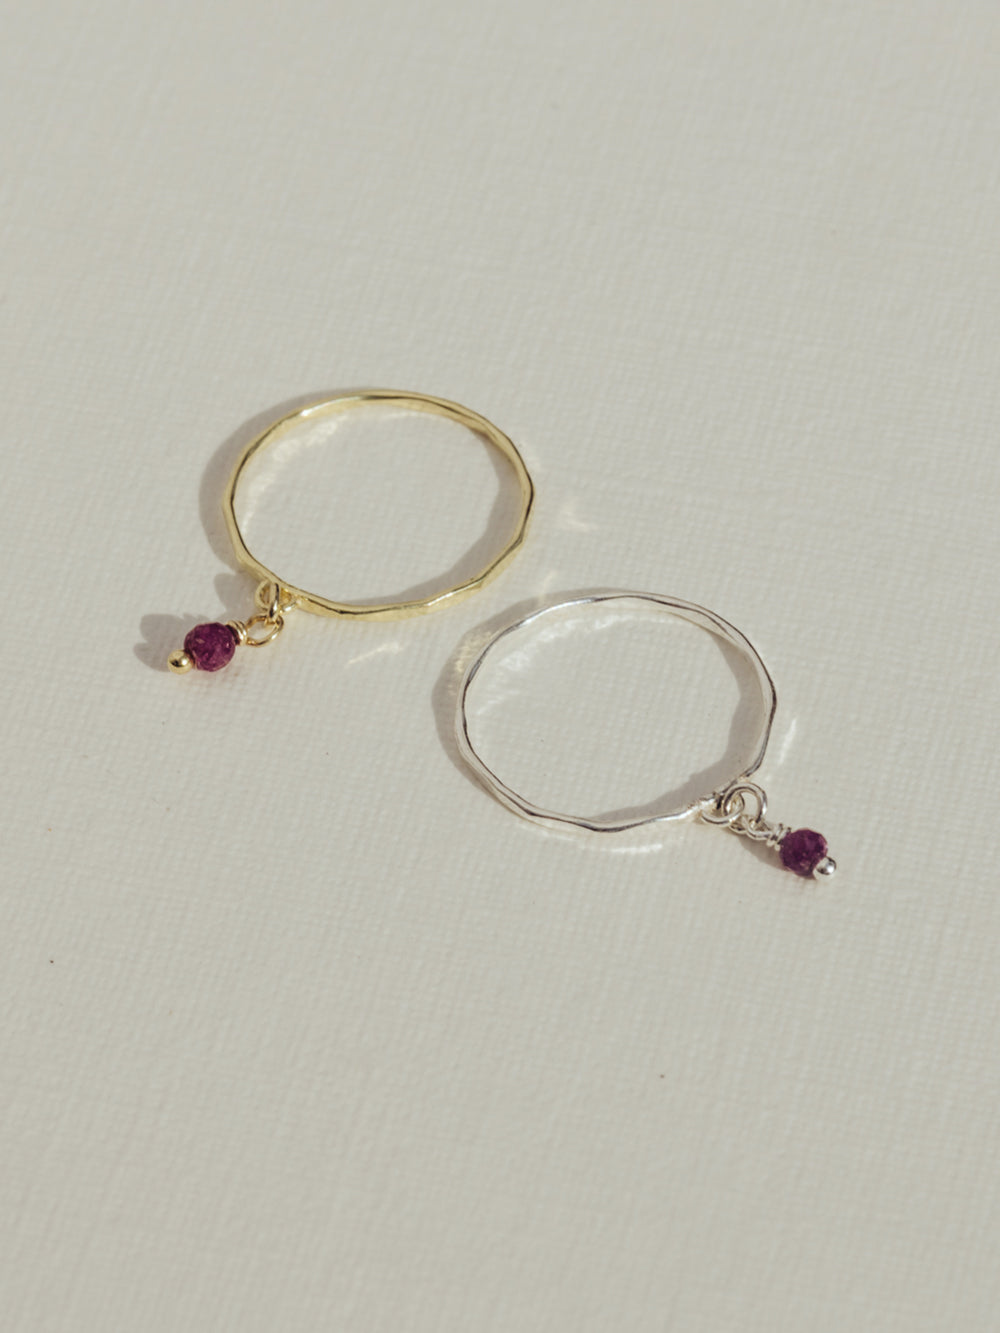 Birthstone ring July - Ruby | 14K Gold Plated